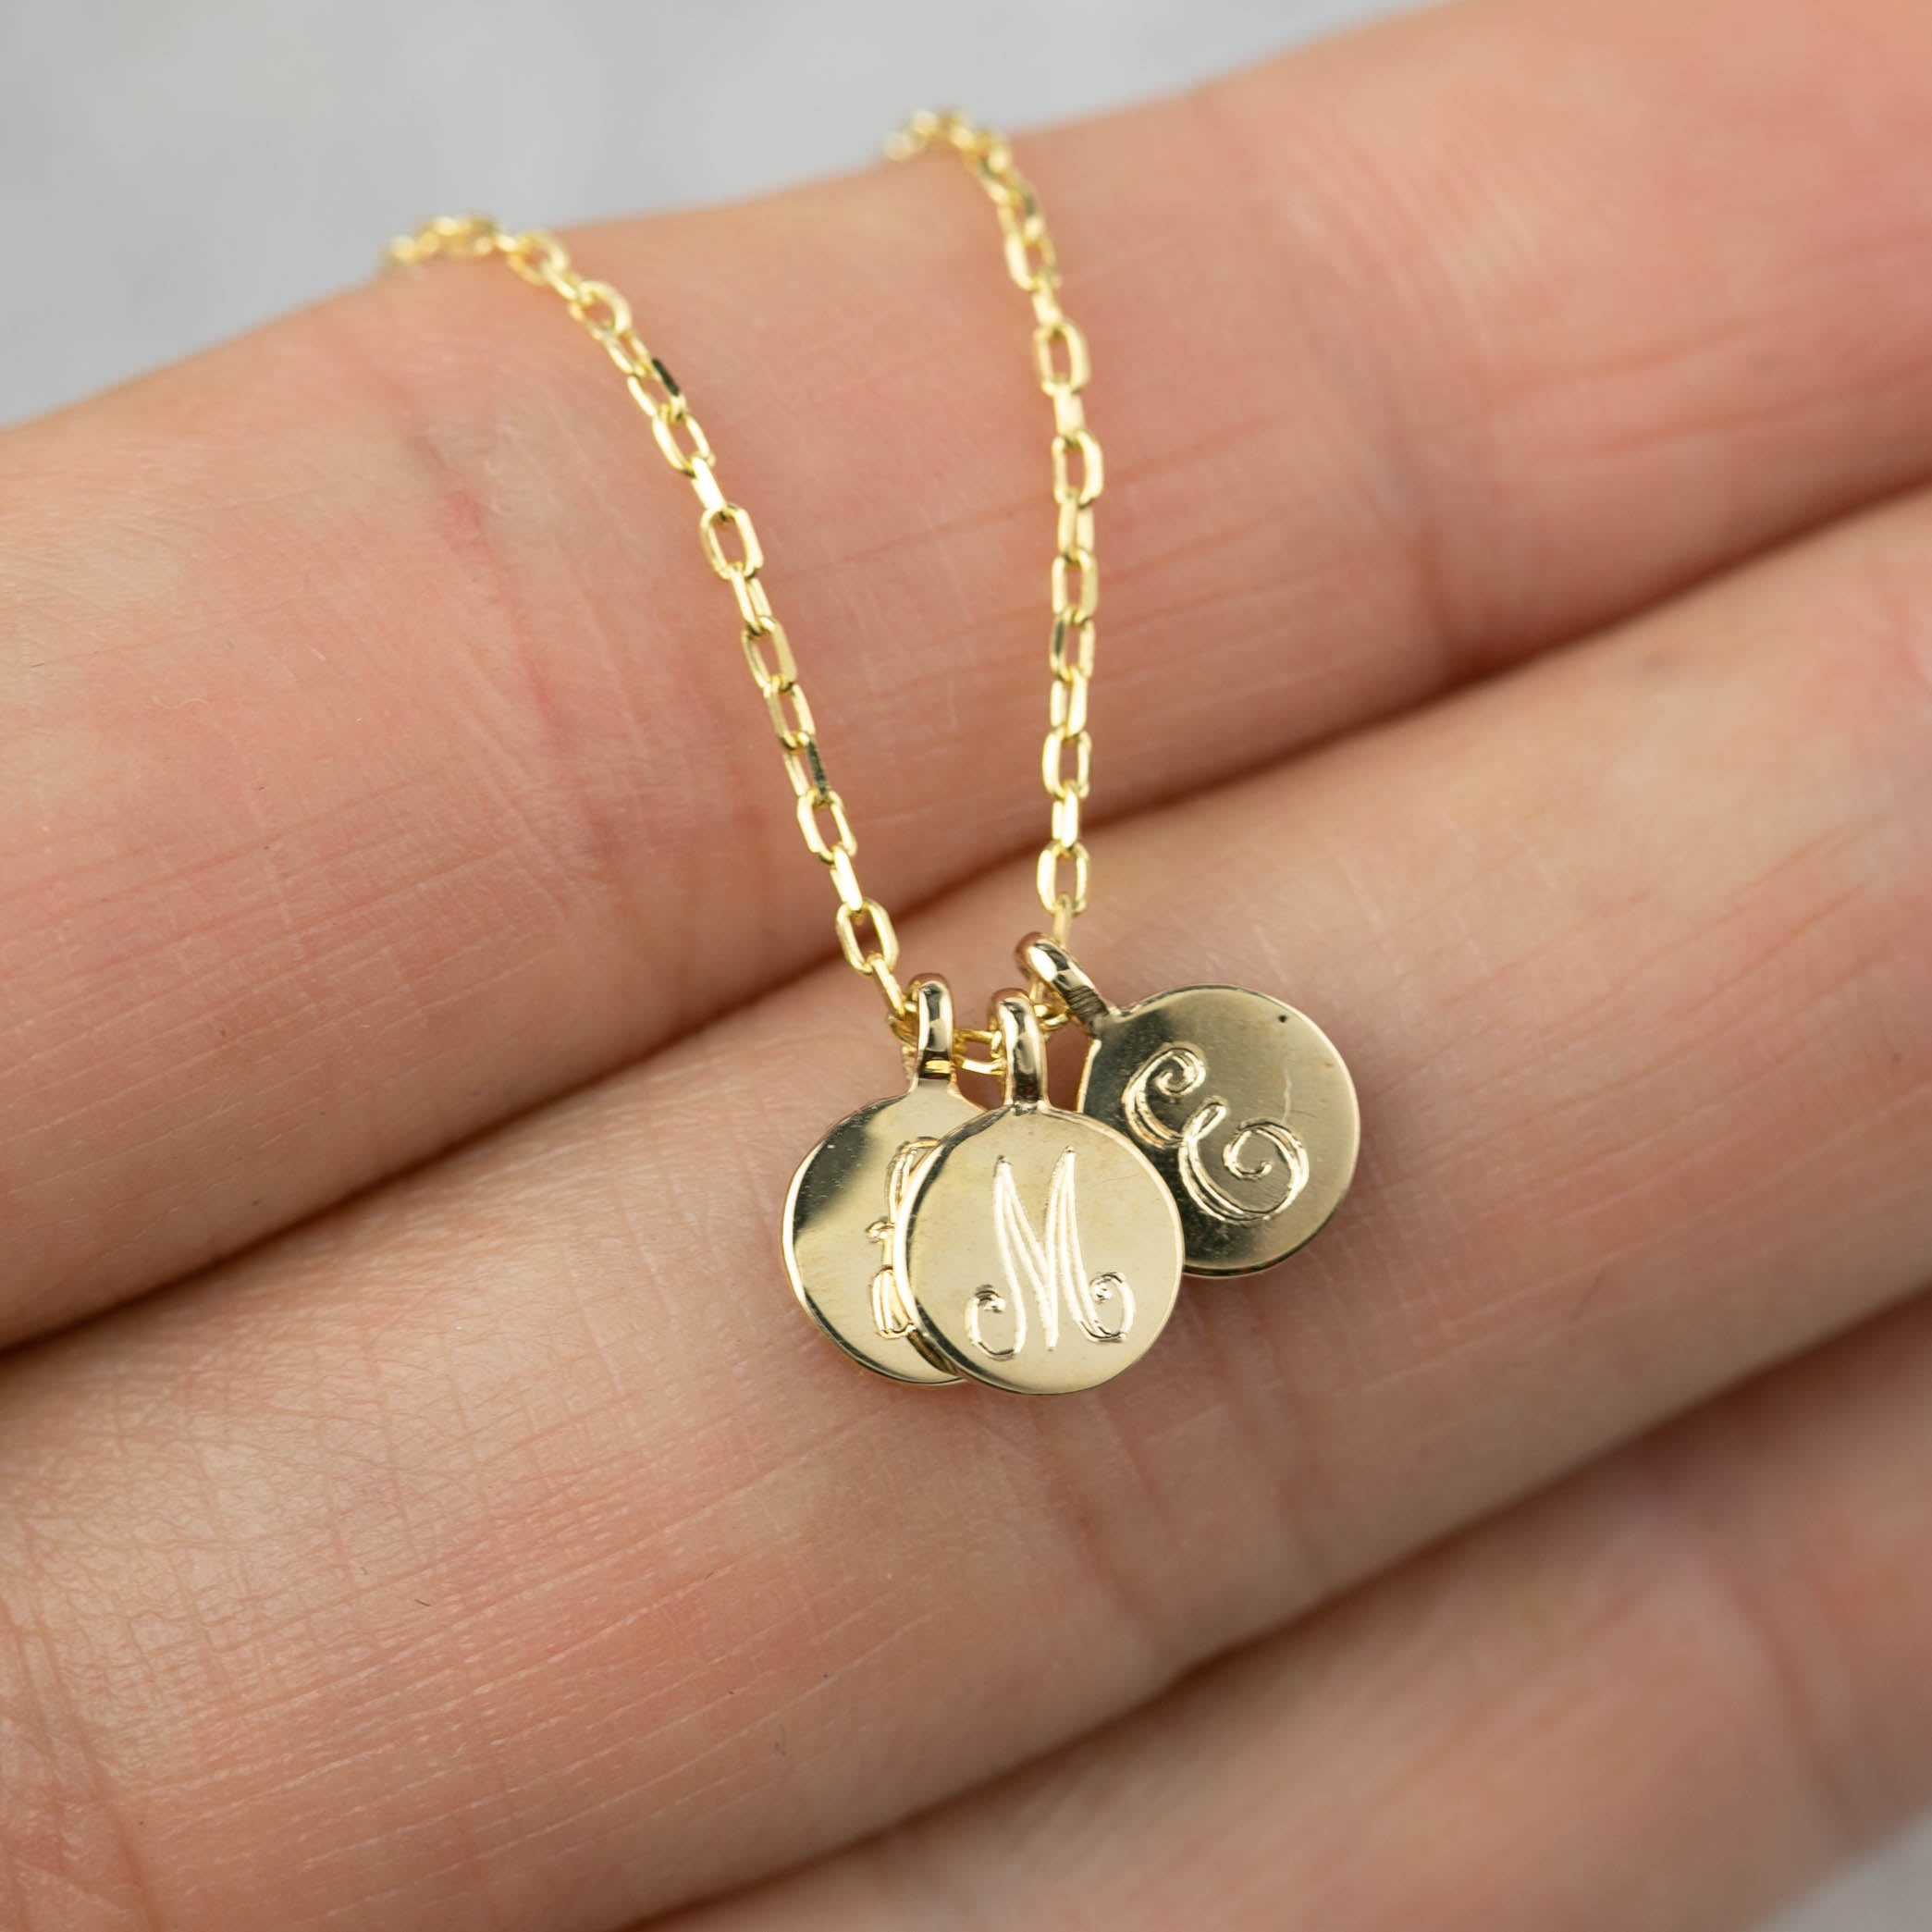 Dainty 9kt Solid Gold Initial Necklace - Lulu + Belle Jewellery